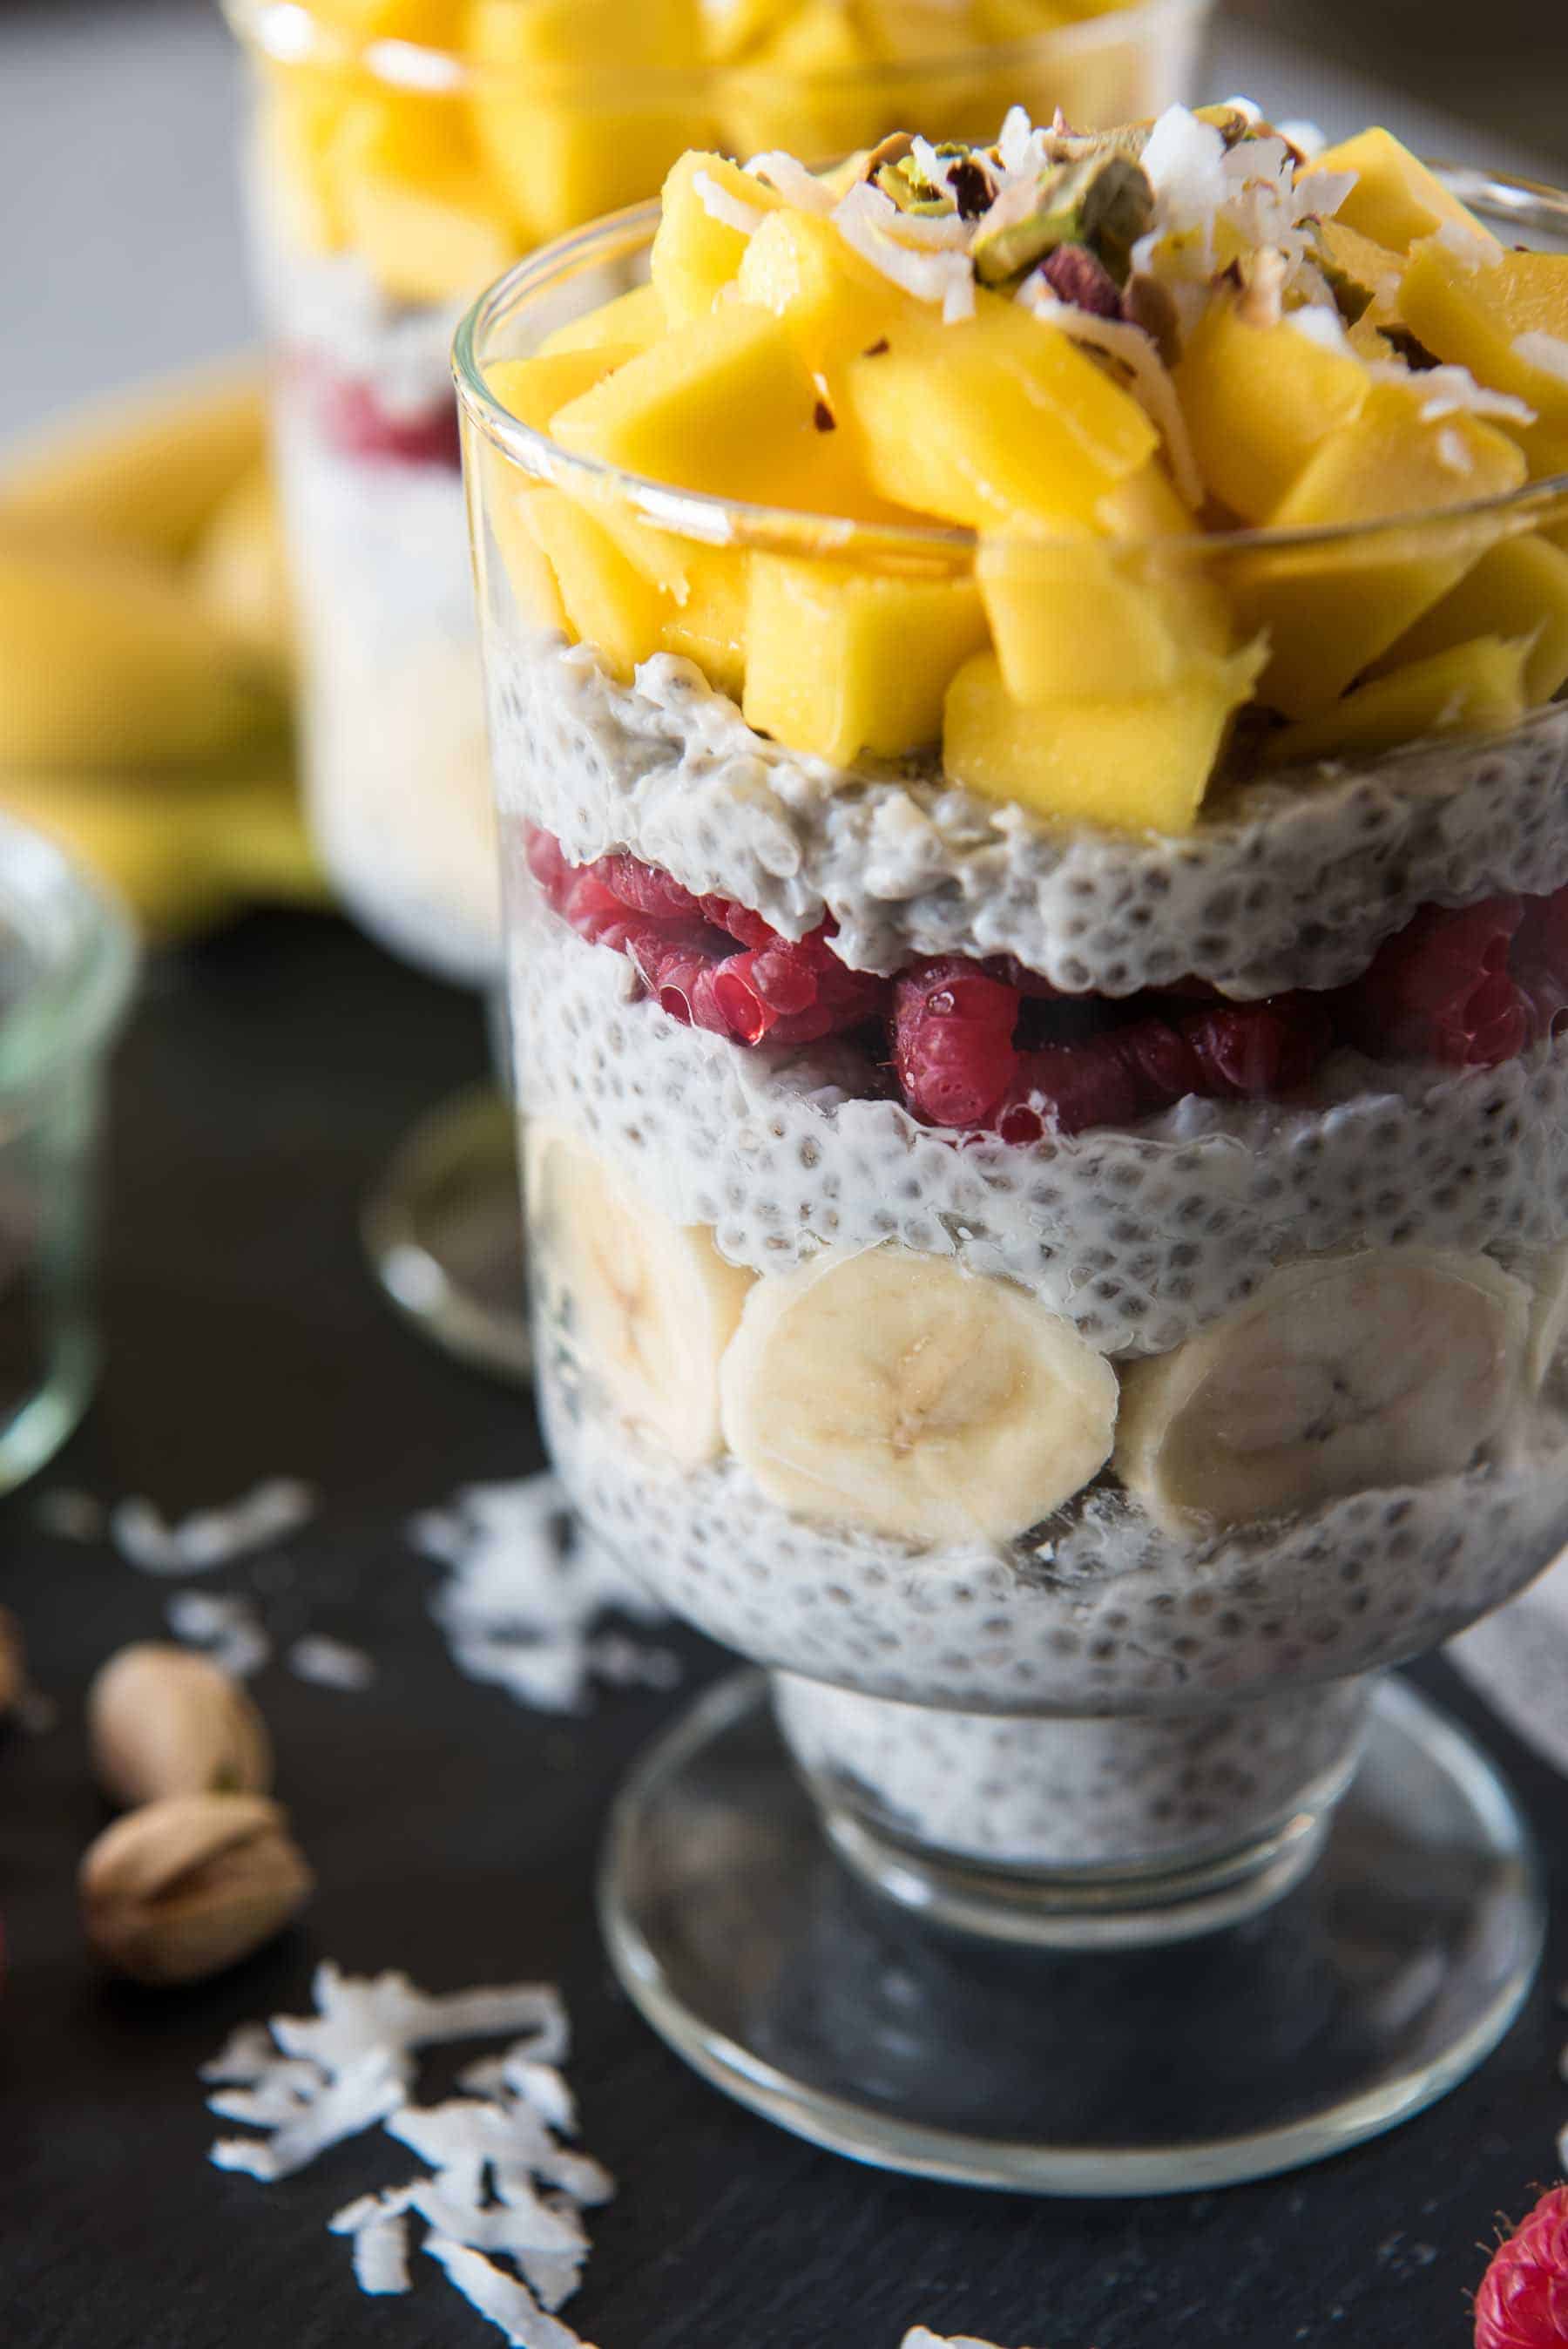 Go healthy with the most surprising dessert! This vegan, paleo, gluten-free Coconut Mango Chia Pudding Parfait is super simple to throw together and will satisfy even the biggest sweet tooth!